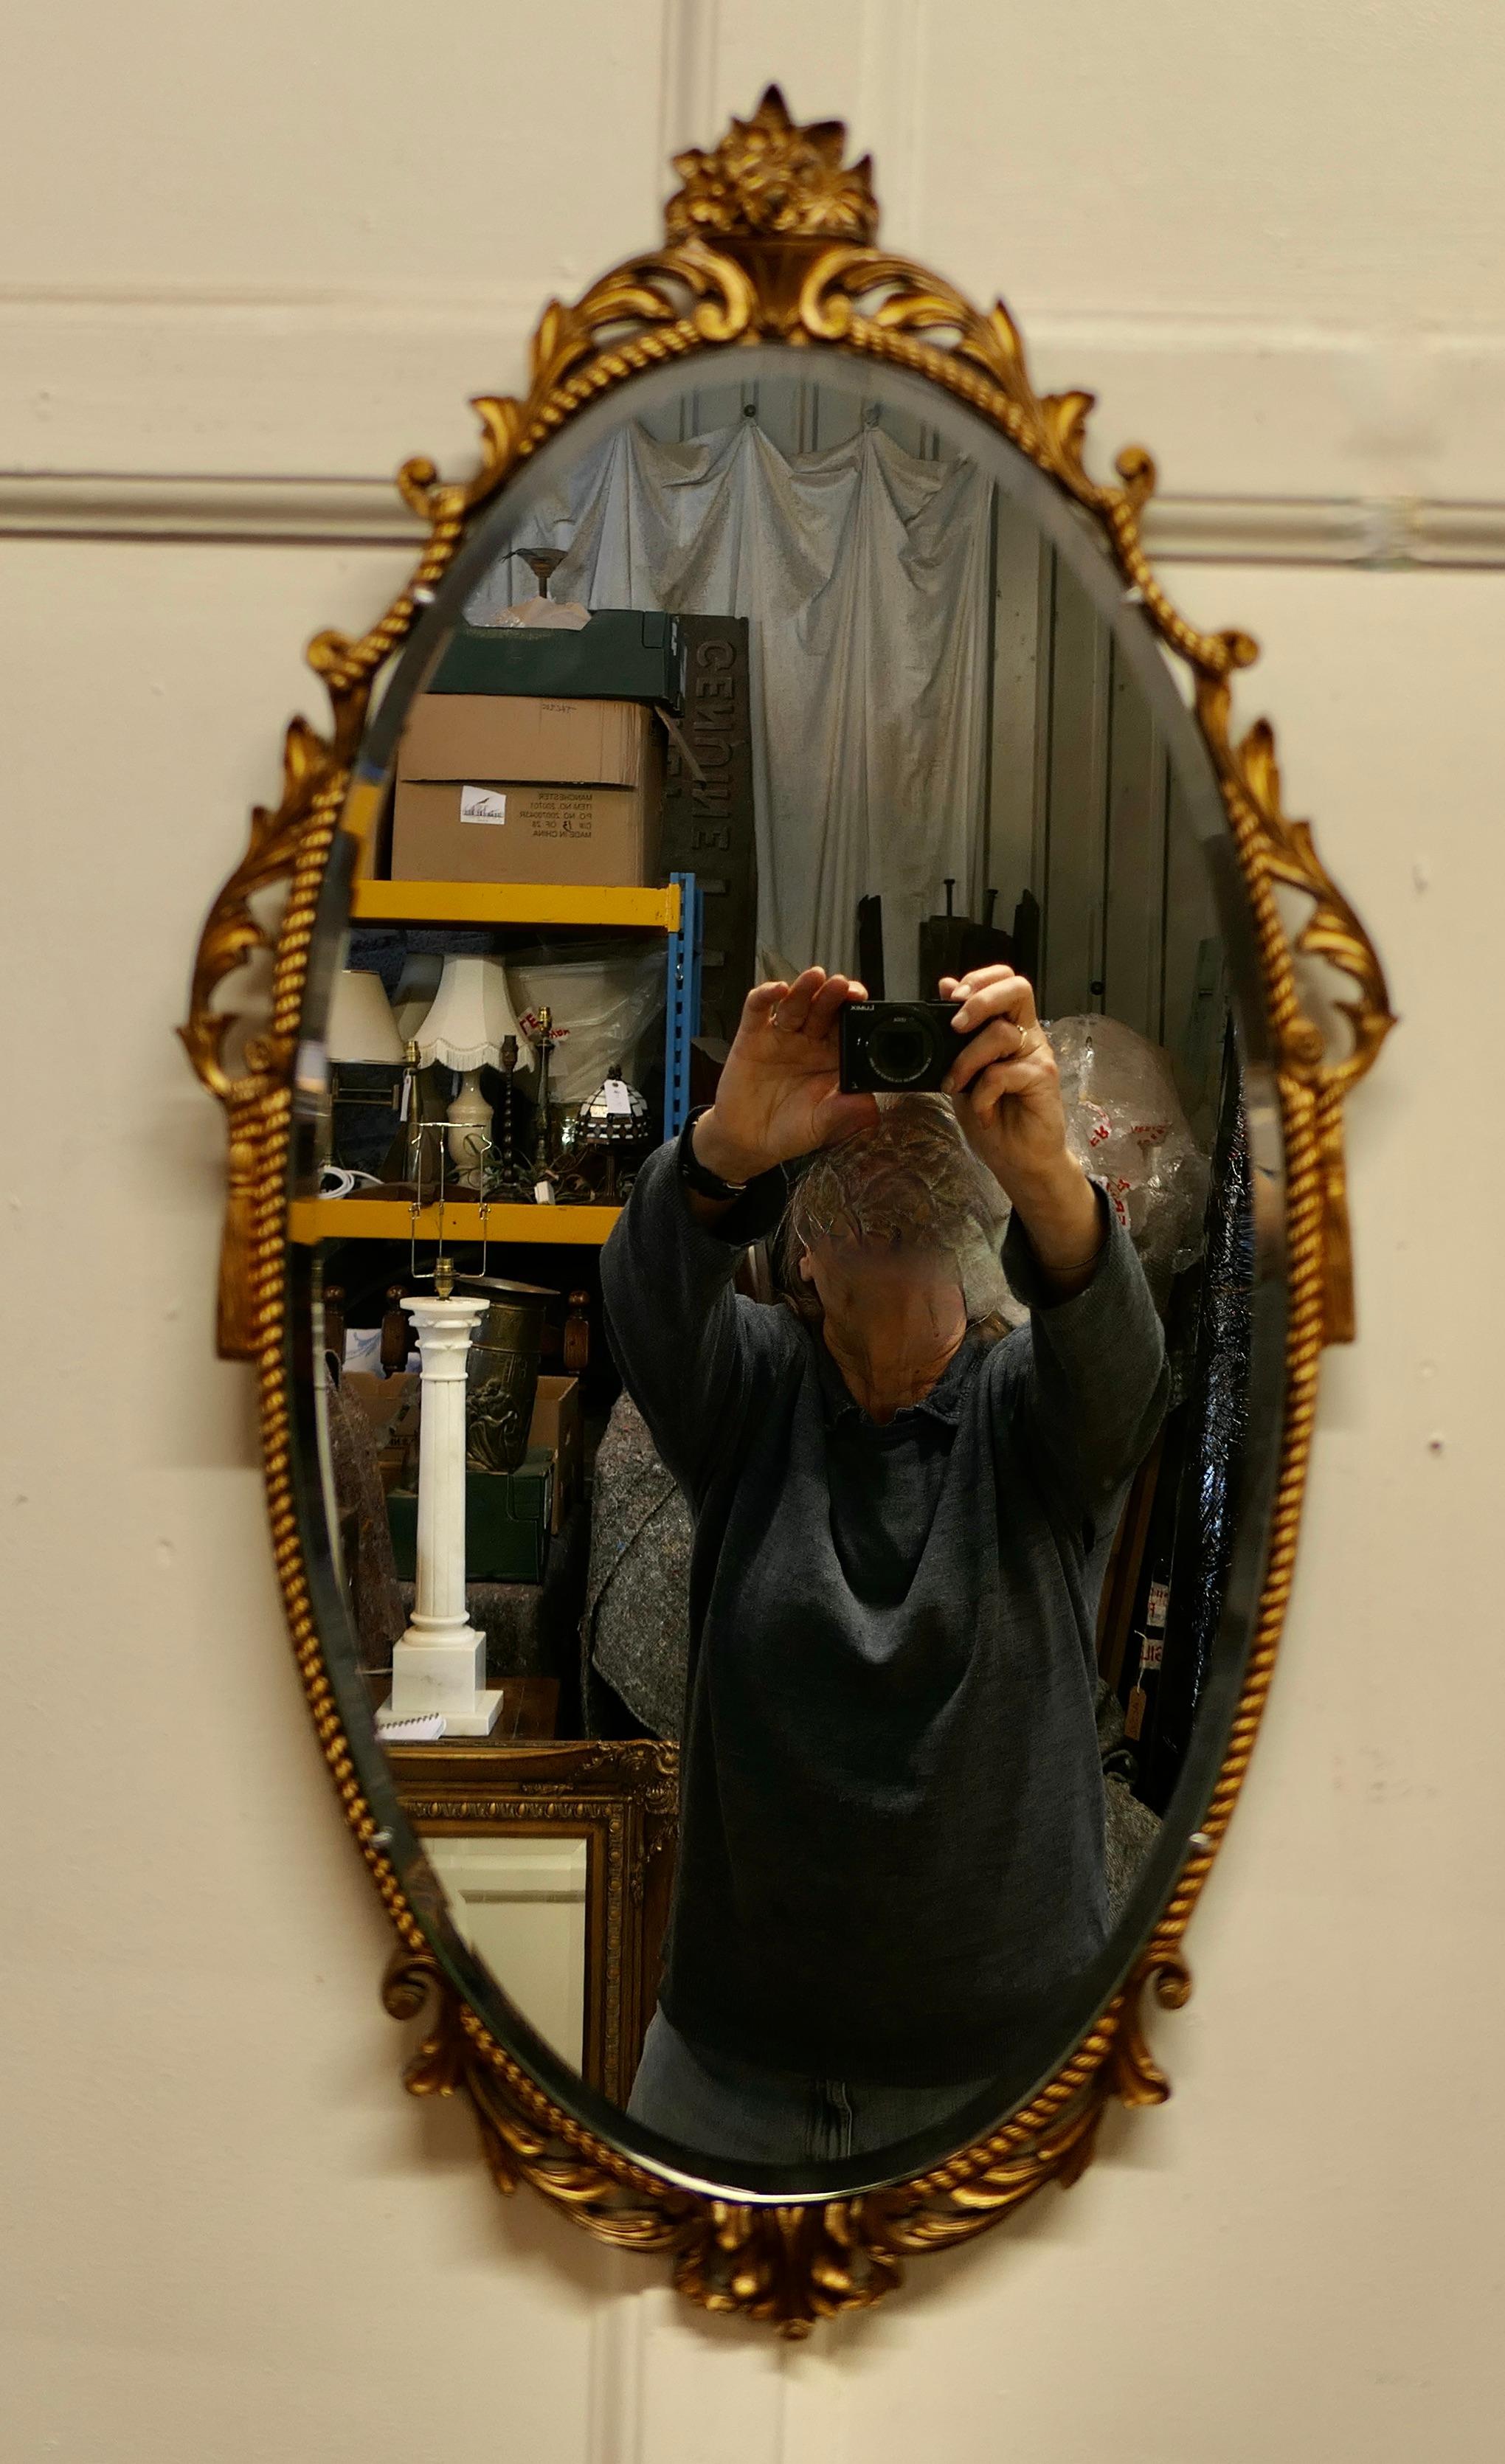 Long oval Art Deco Atsonea ornate gilt wall mirror

The Mirror is Oval it has a decorative Art Deco Rococo gilt Frame with surrounds a bevelled glass mirror.
The mirror glass is original and in good condition with little or no foxing.
The Mirror